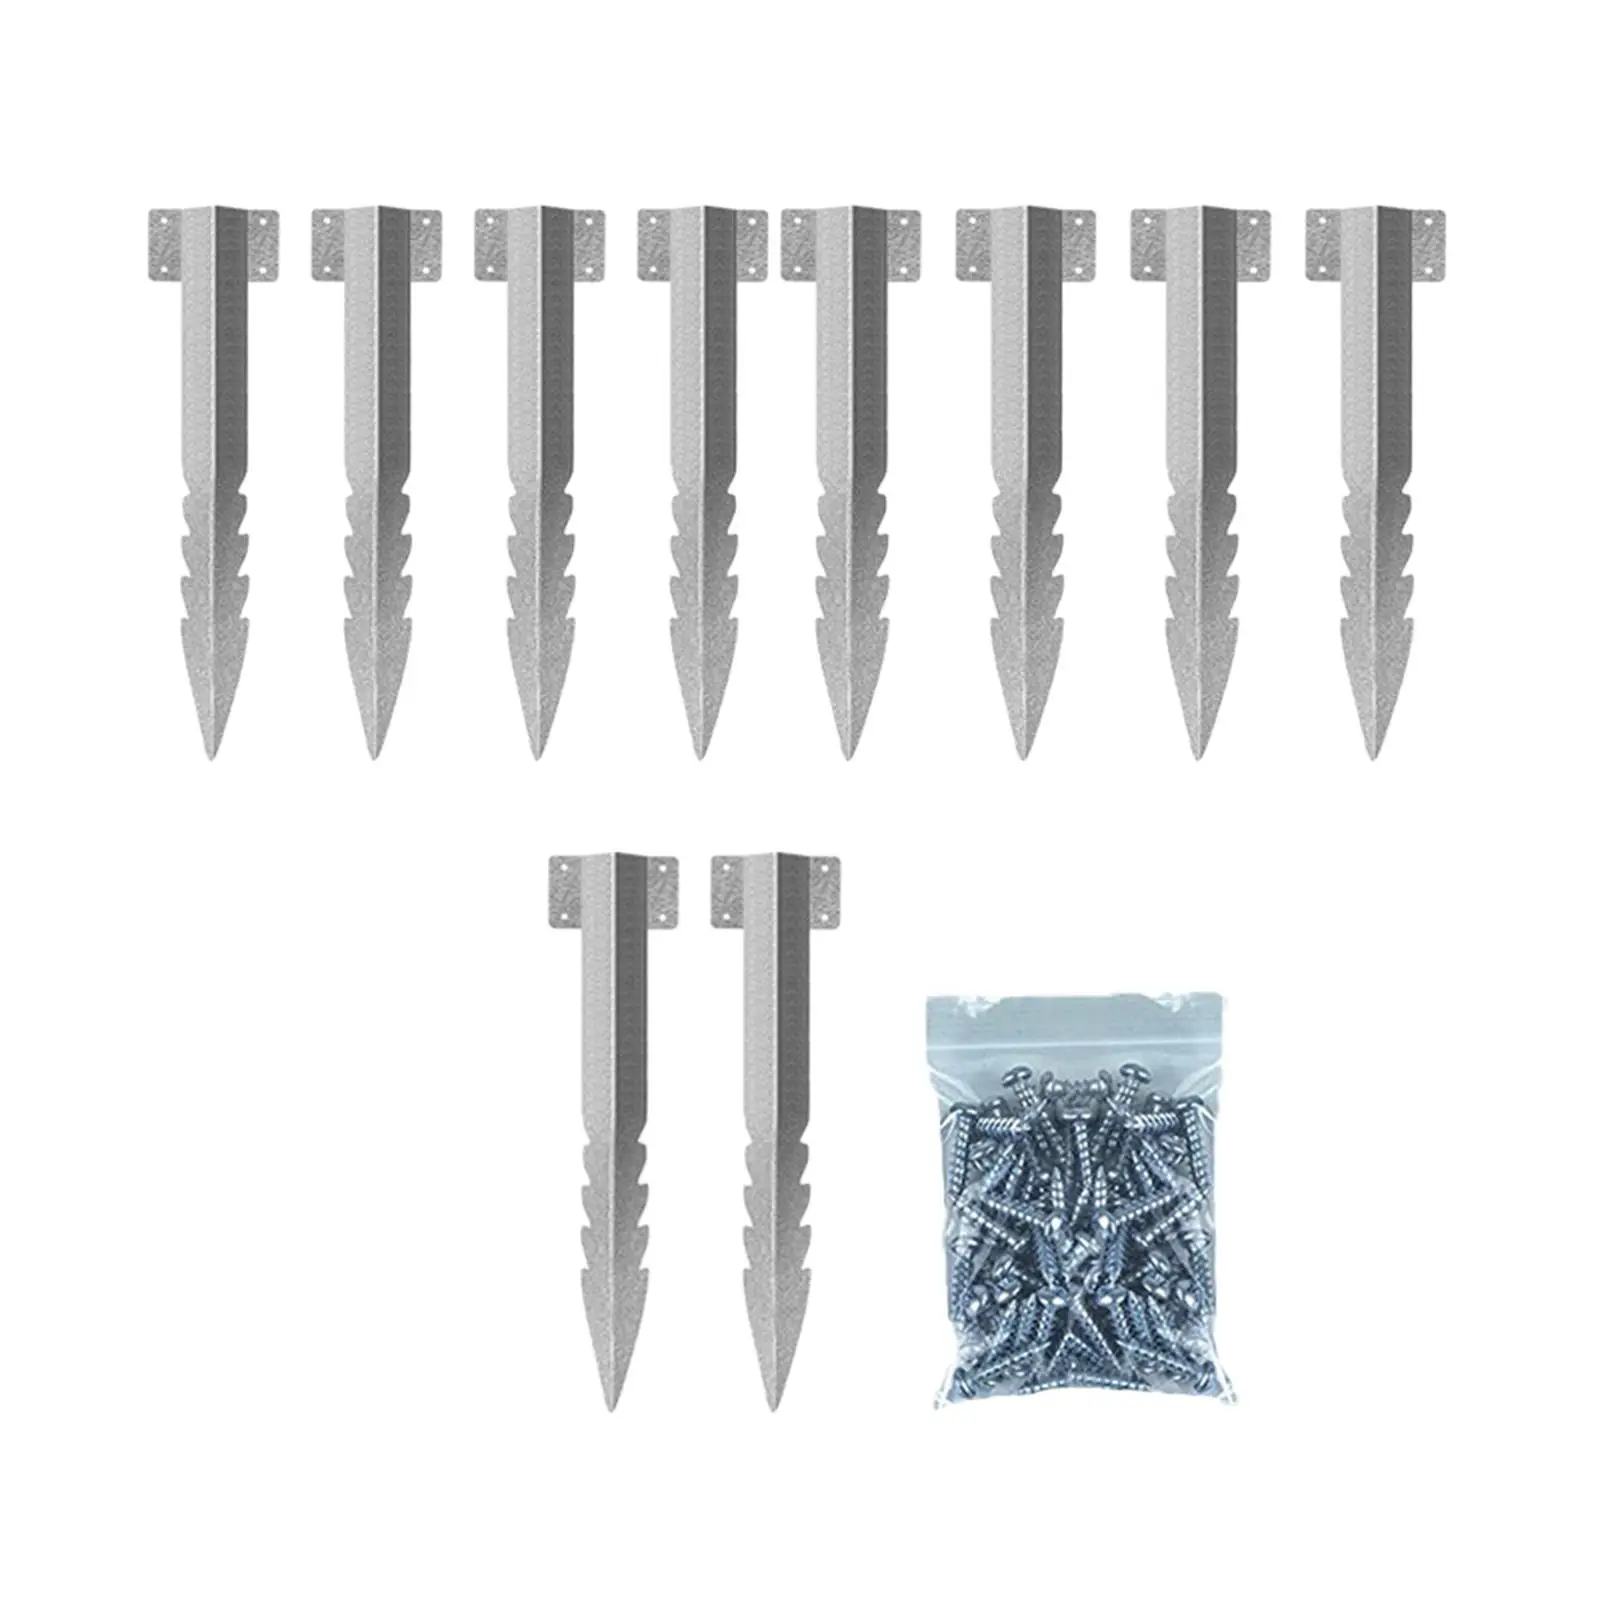 10 Pieces Fence Post Repair Kits Duable with Screws Railway Sleepers Brackets Decking Base Frame Wood Fence Repair Tilted